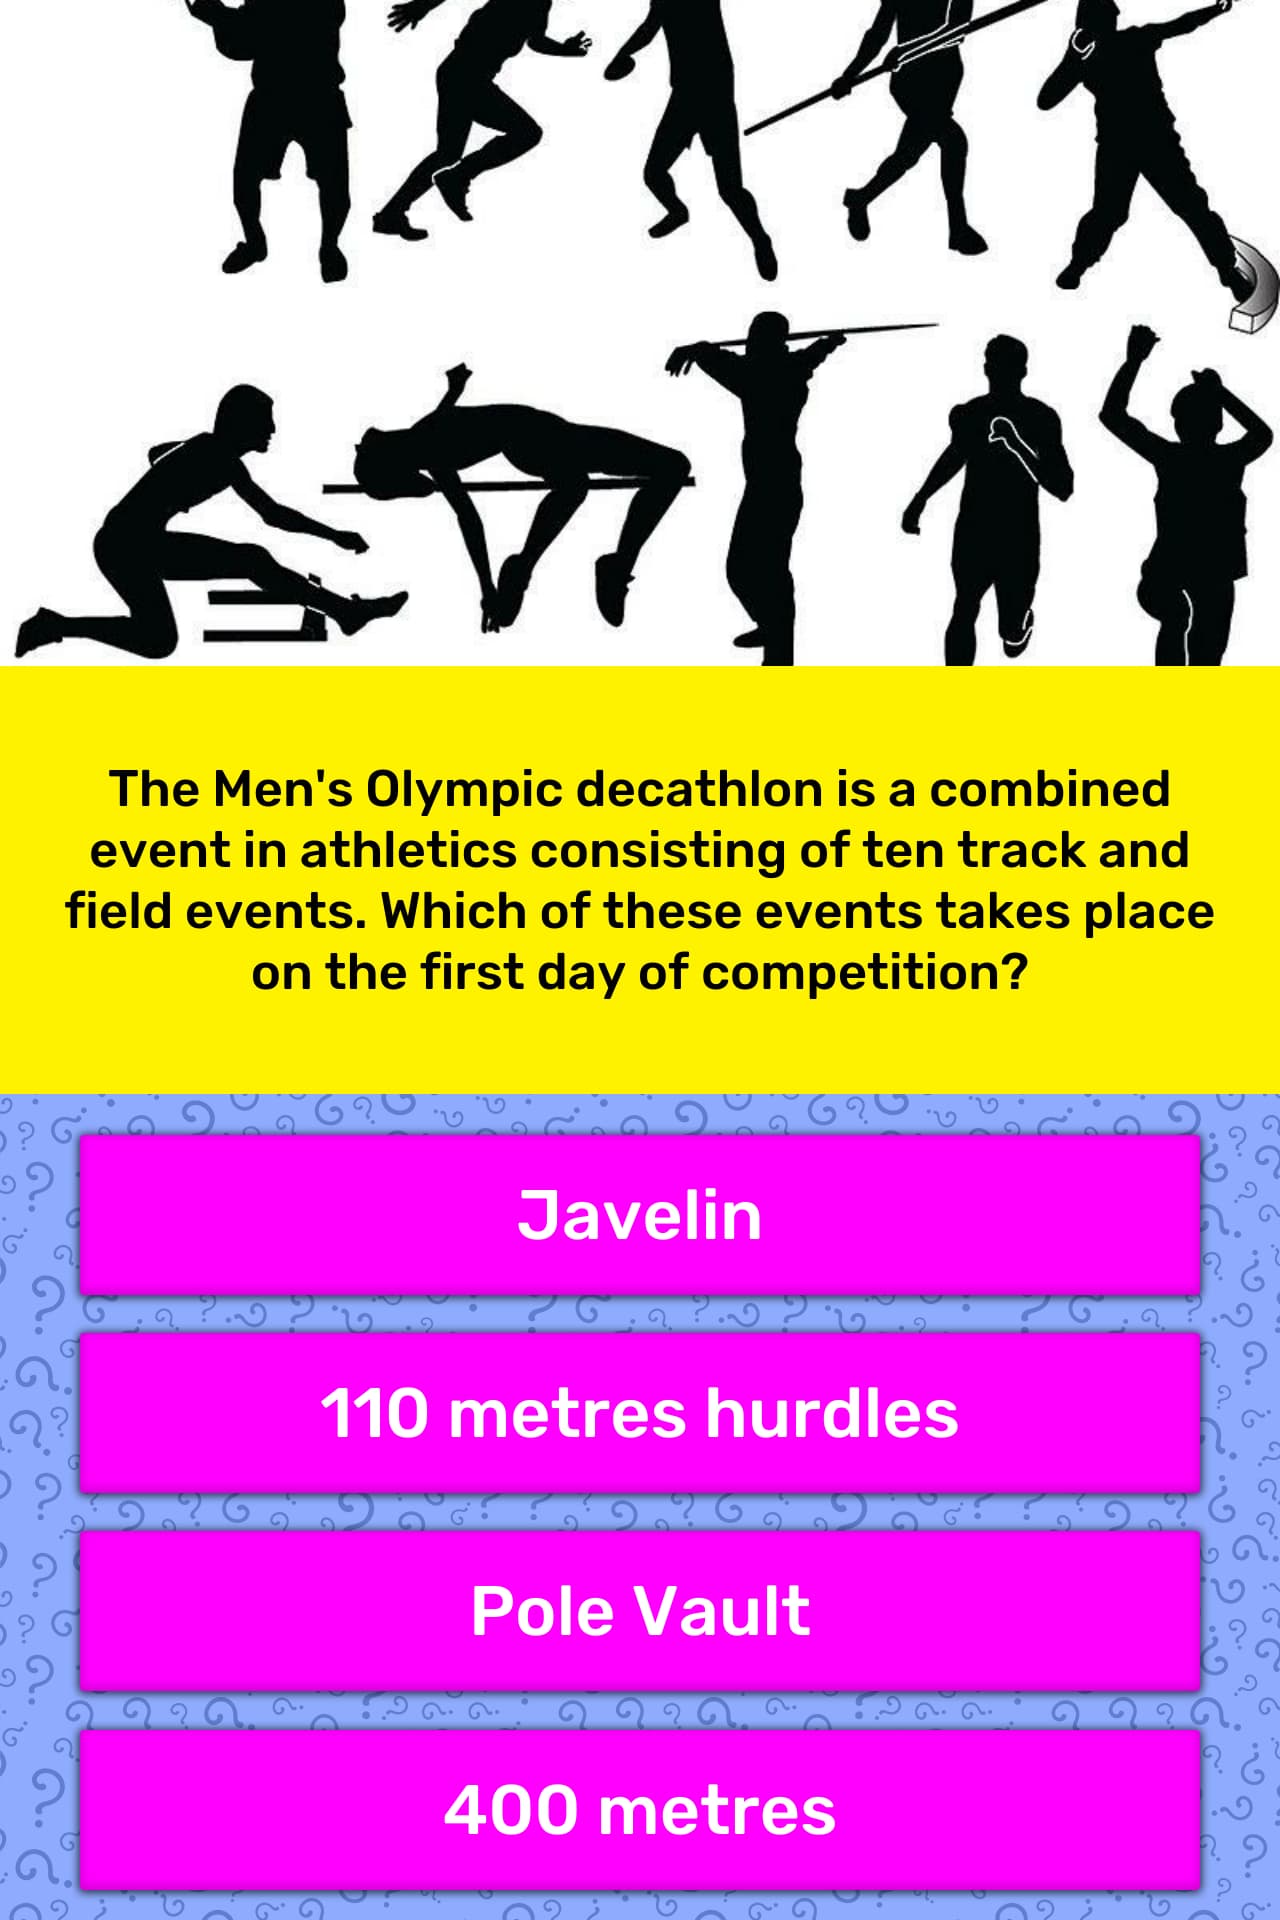 The Men's Olympic decathlon is a 